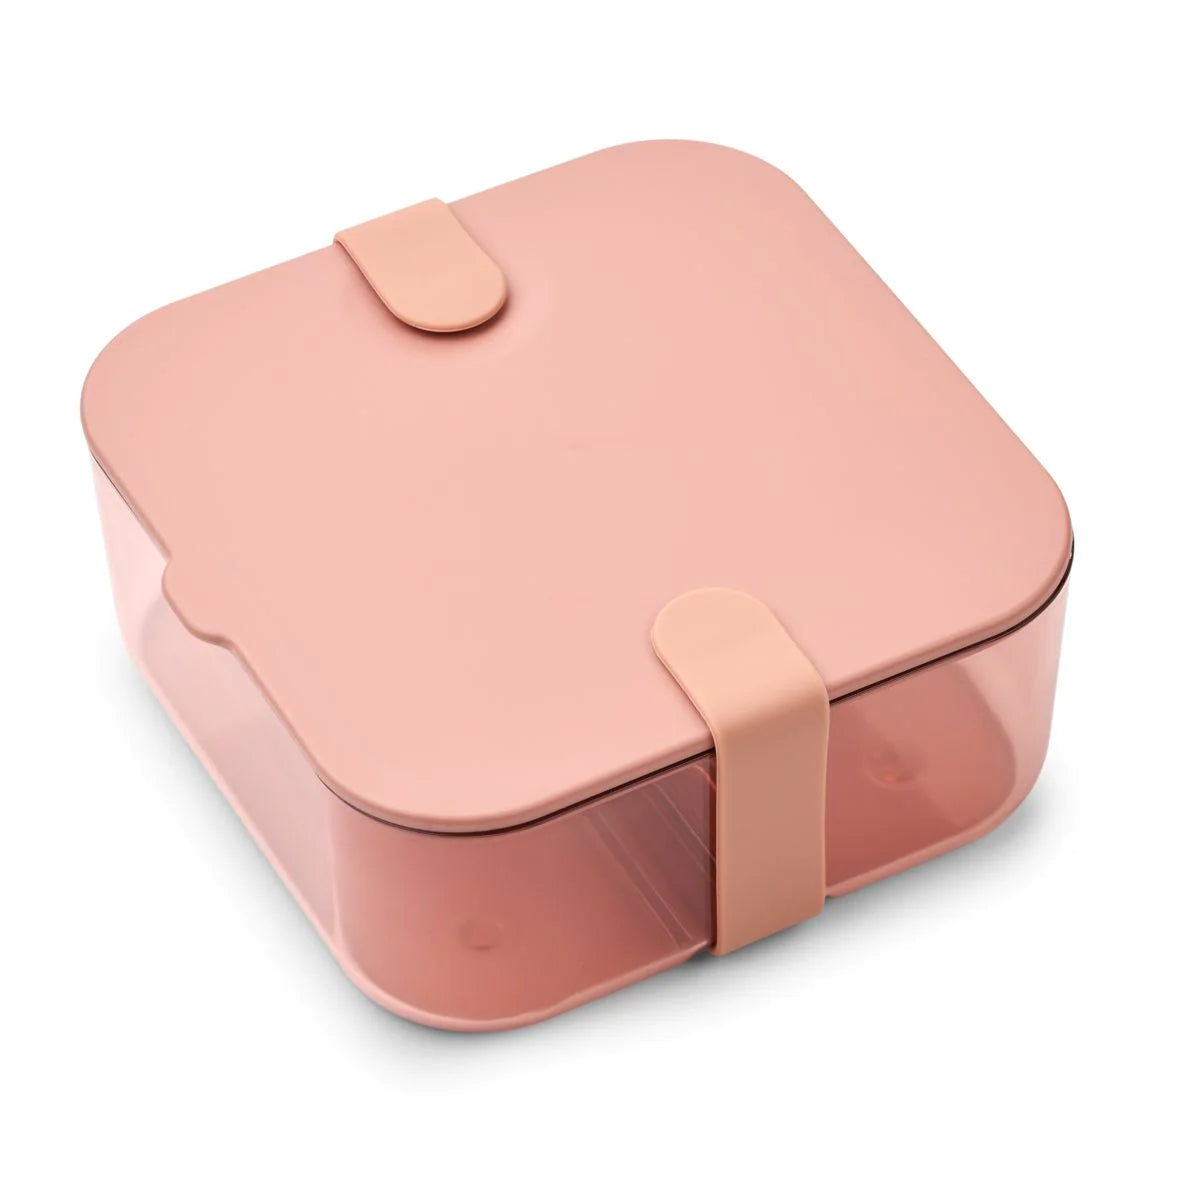 CARIN LUNCH BOX SMALL - TUSCANY ROSE, LIEWOOD